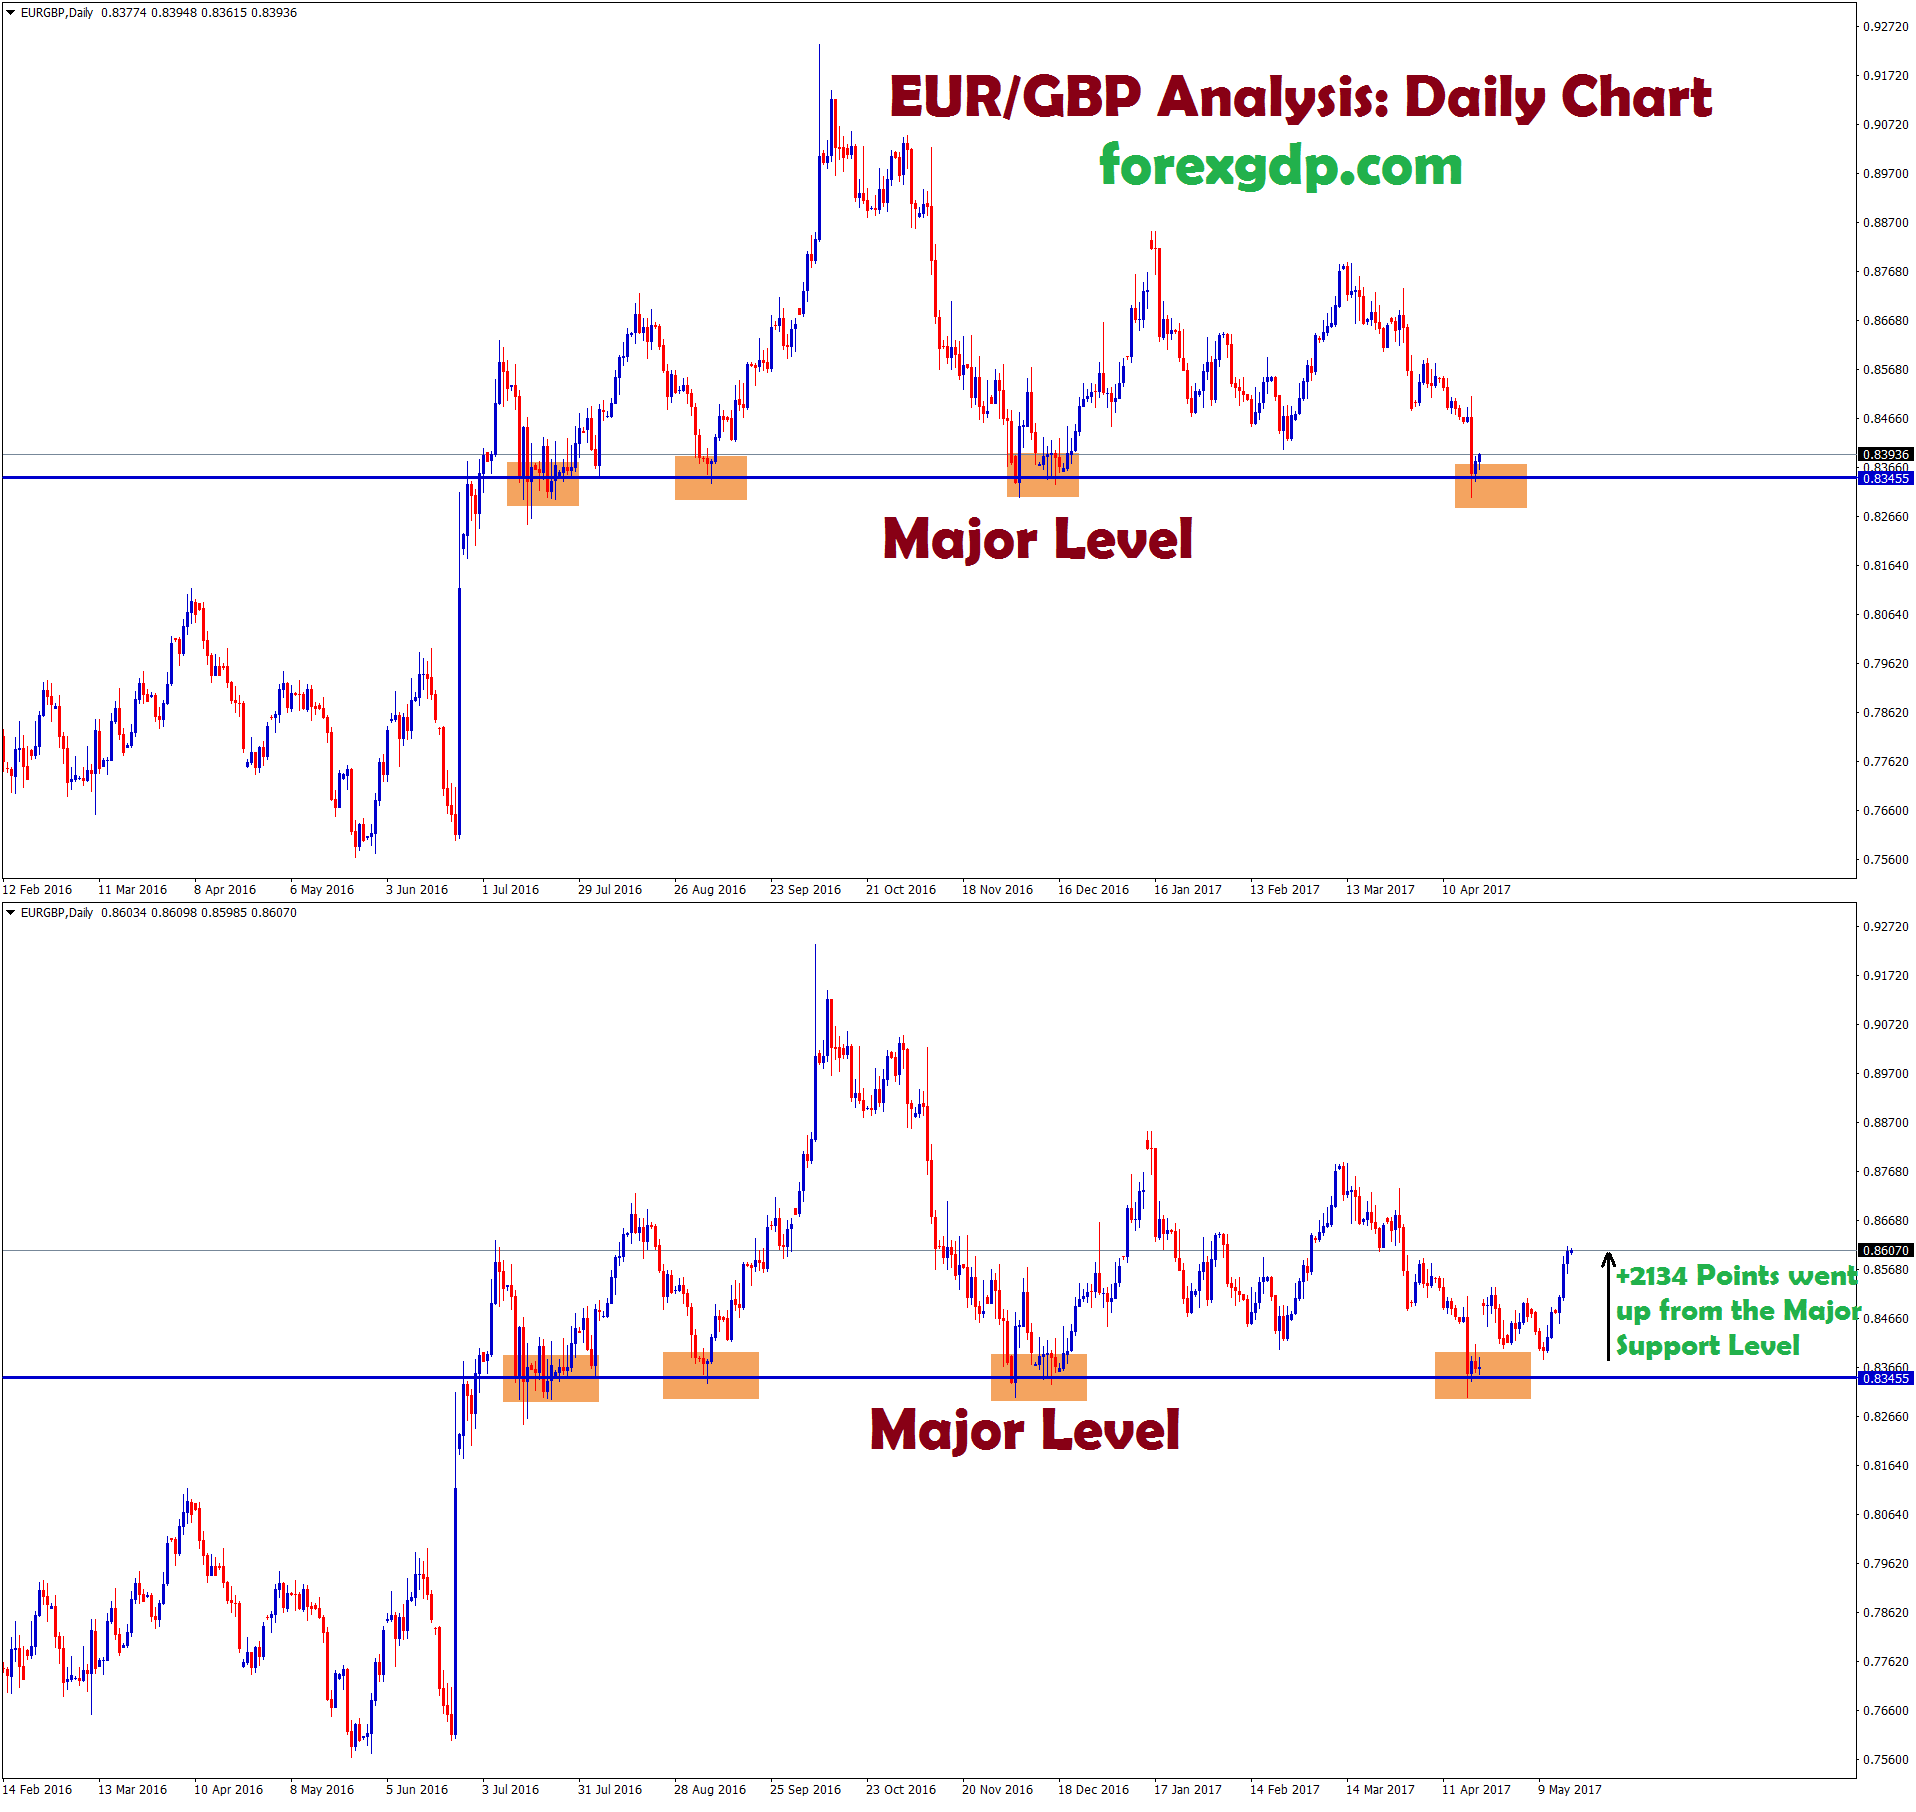 EURGBP reversal patterns at support level